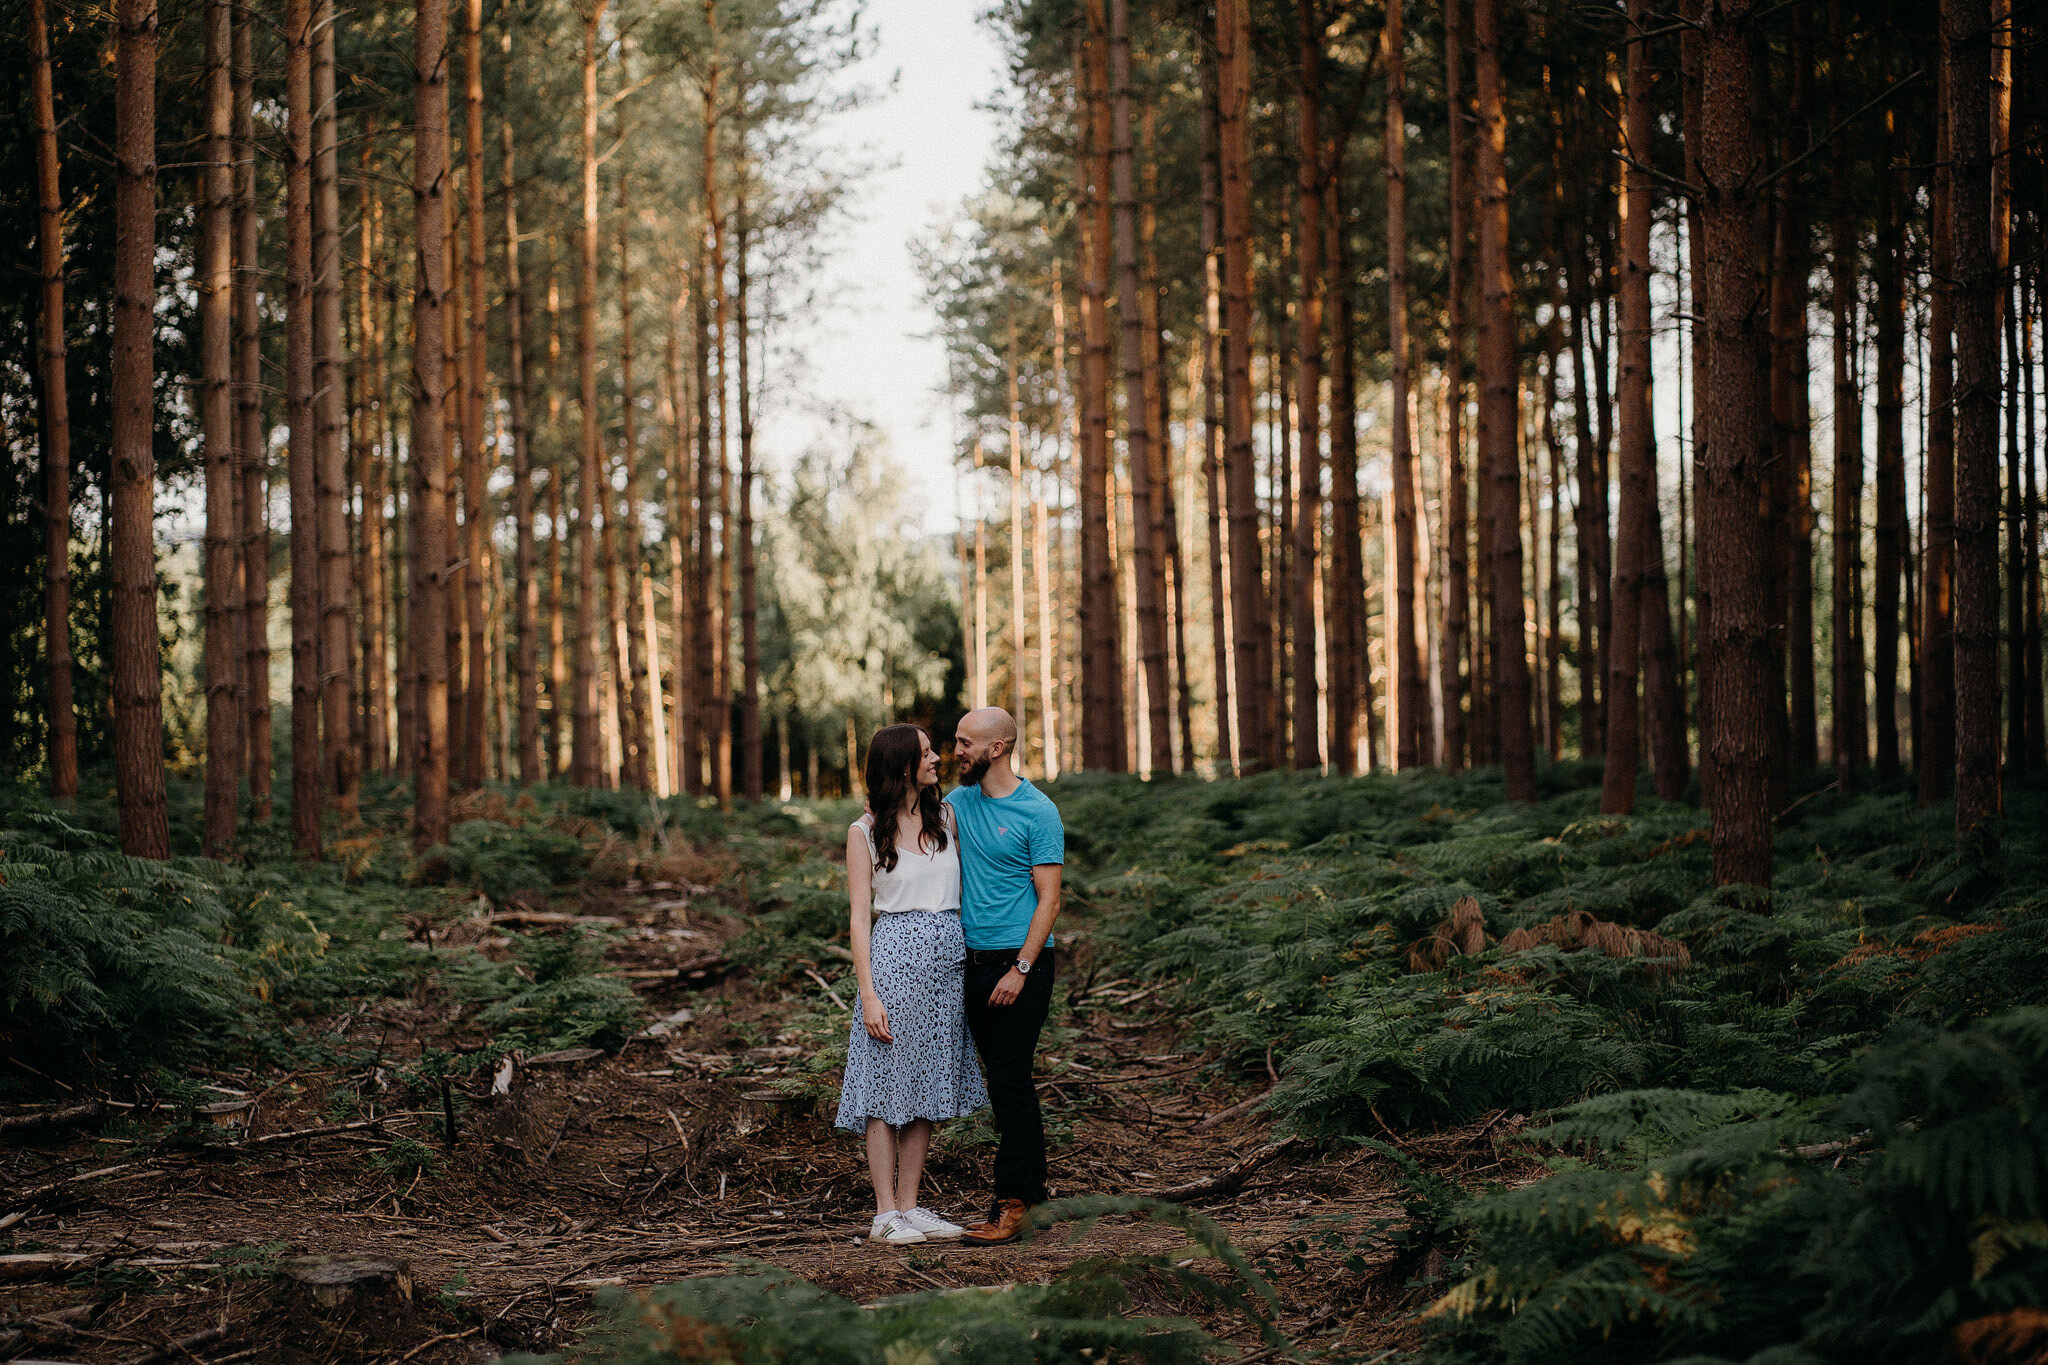 Cannock Chase Engagement Shoot - Alex and Rich-17-49-31 Social Media Ready.jpg